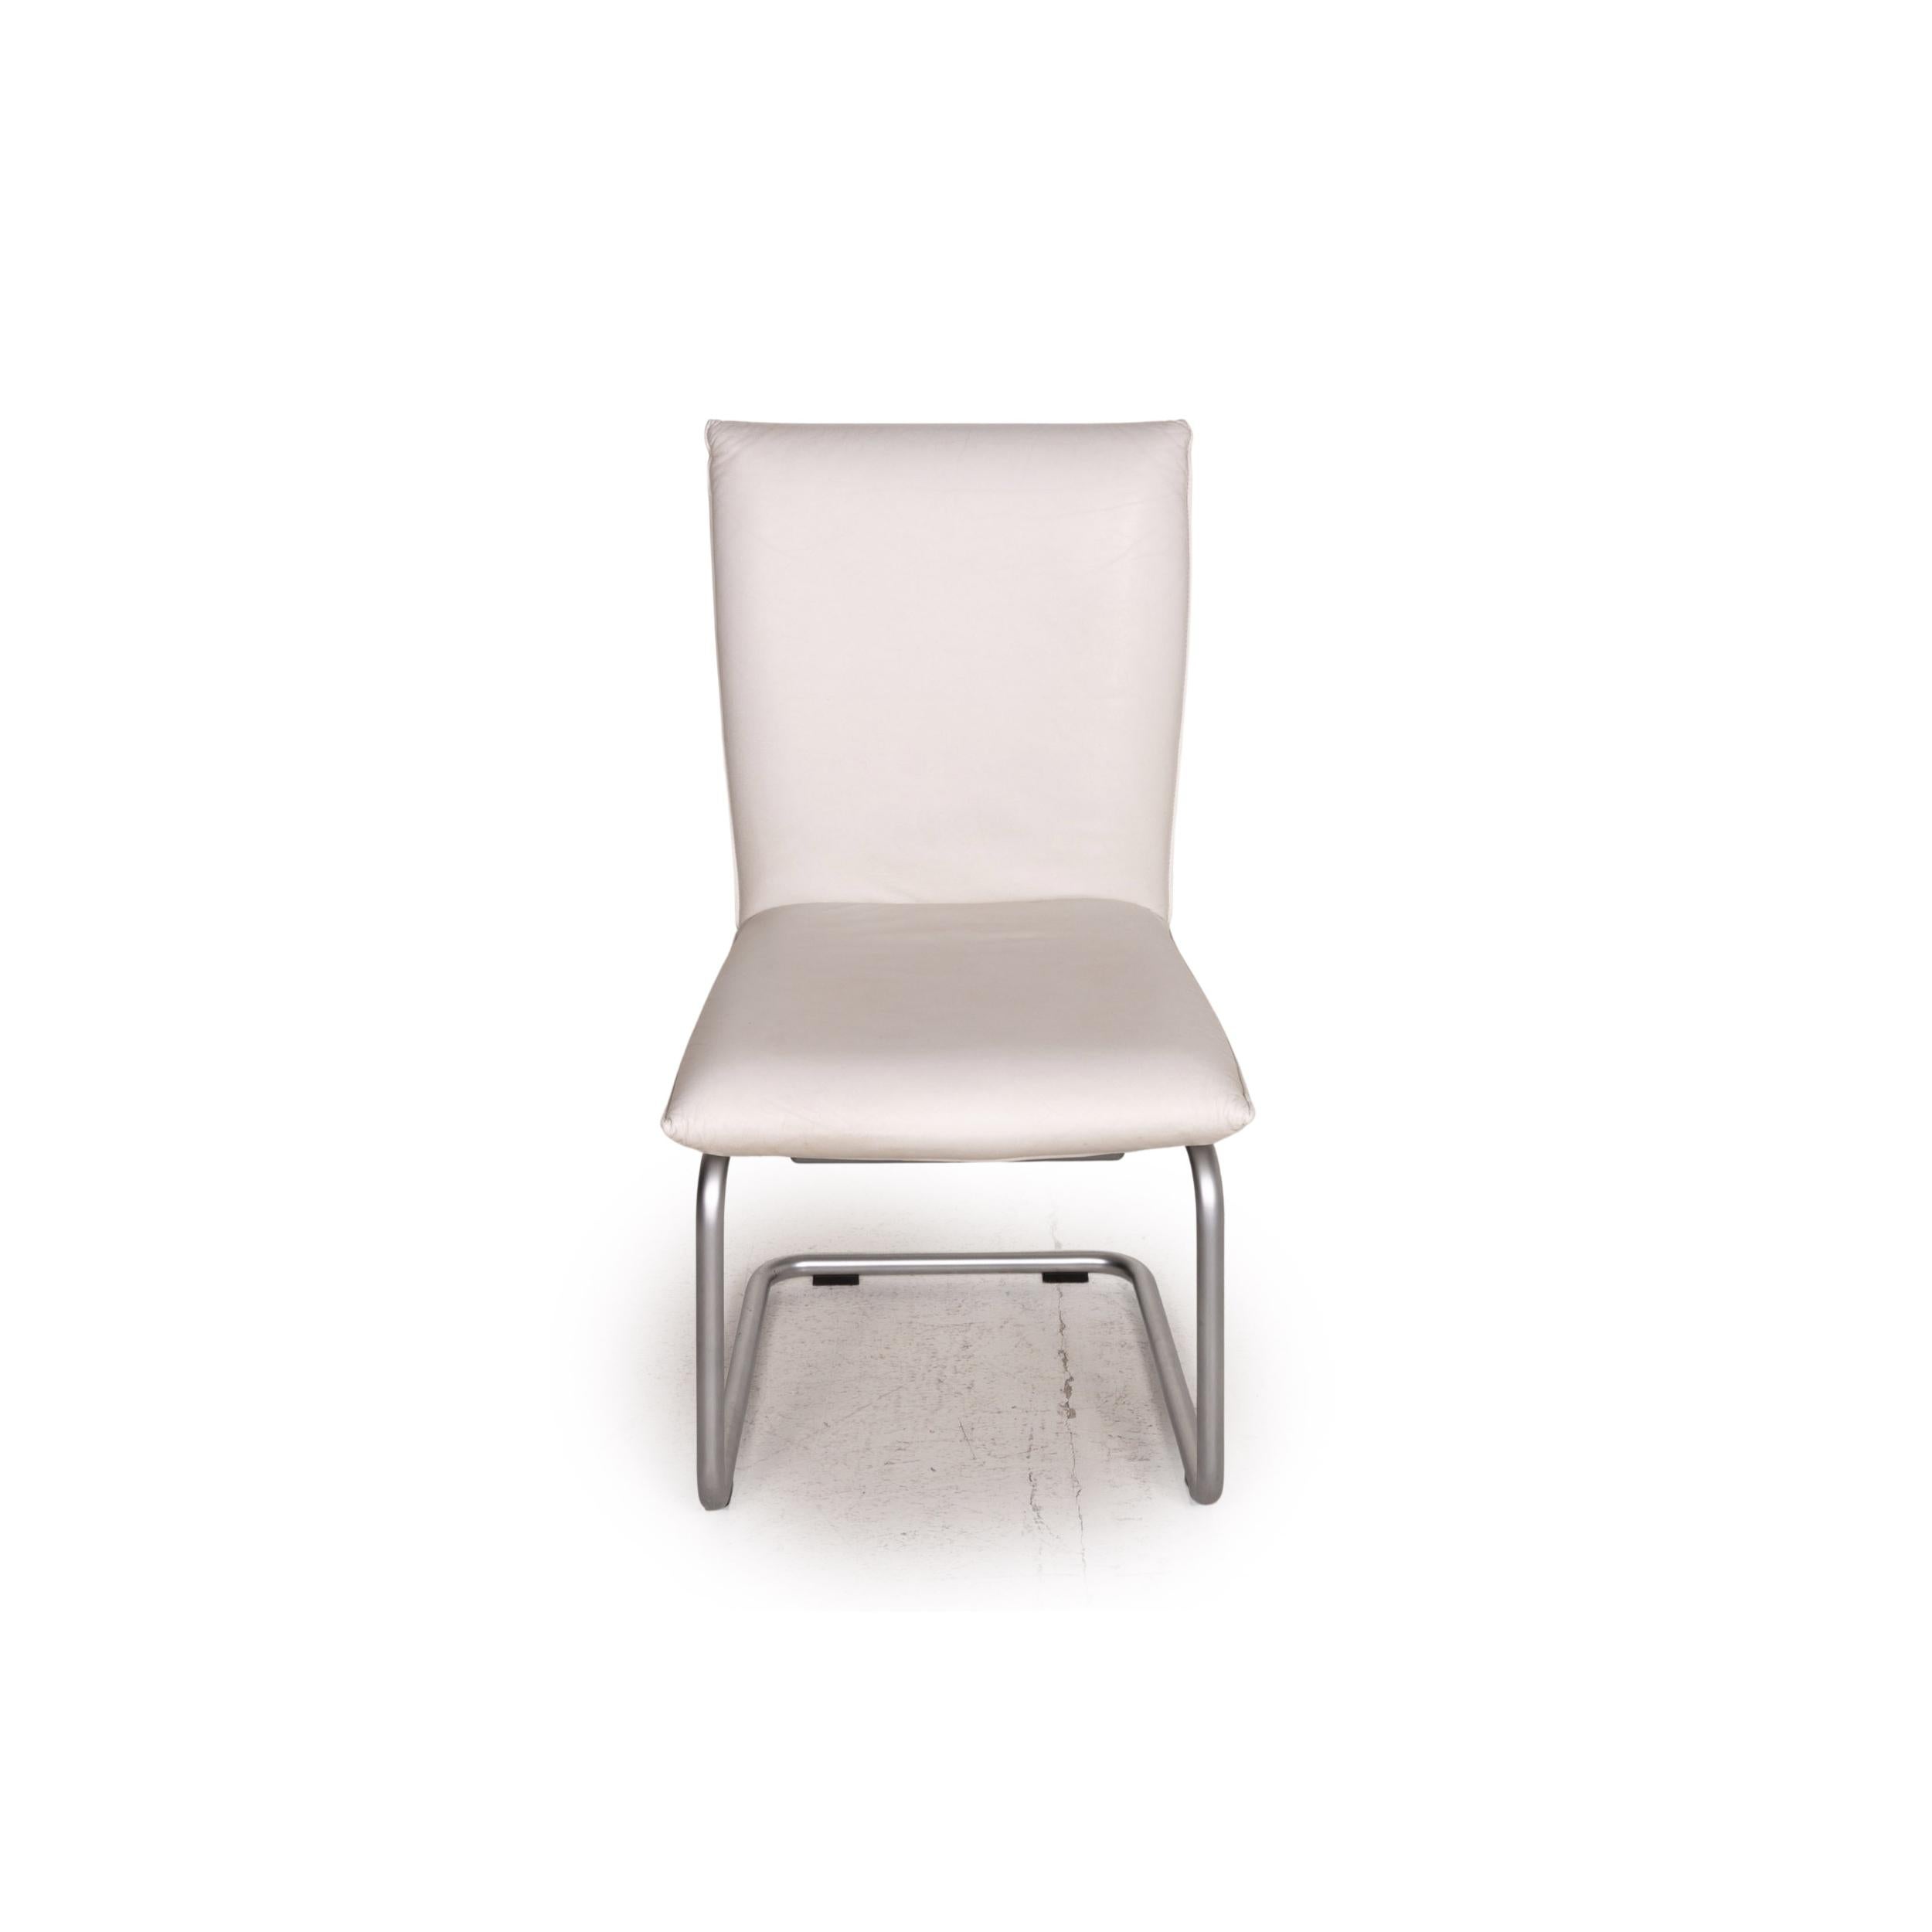 Rolf Benz 620 Leather Chair Cream Cantilever 2